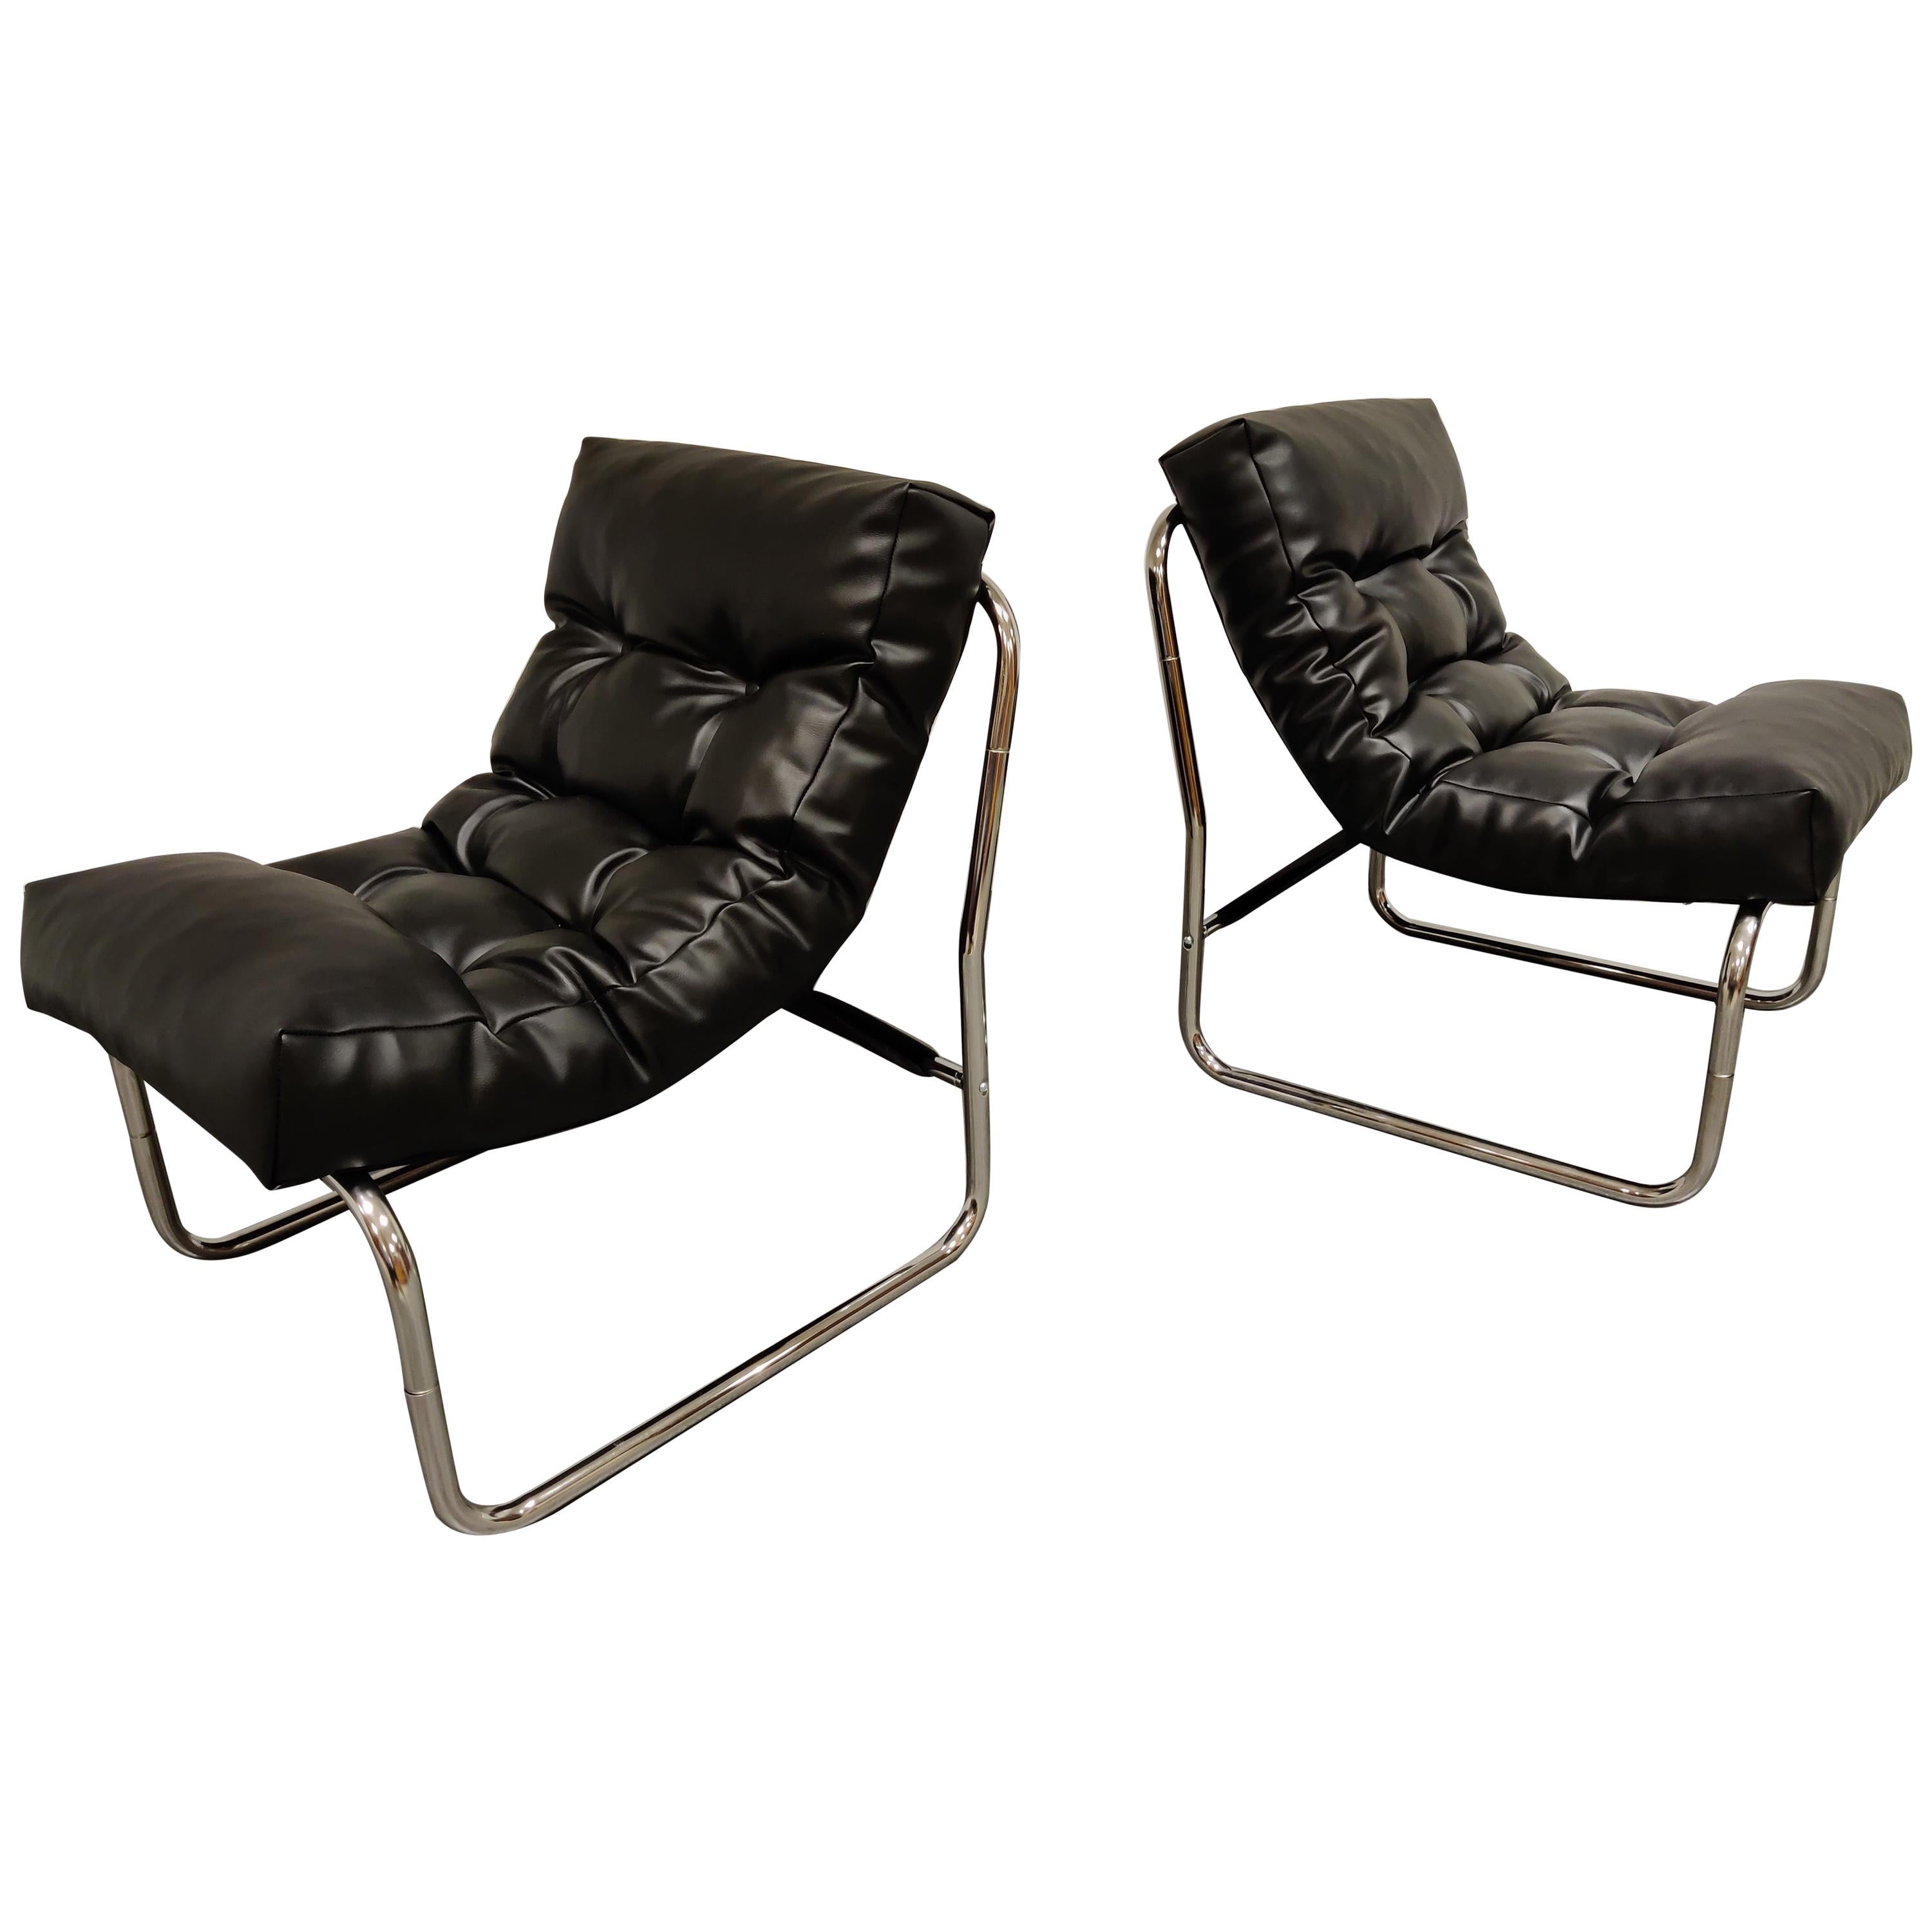 Vintage Lounge Chairs by Gillis Lundgren for Ikea, Set of Two, 1970s